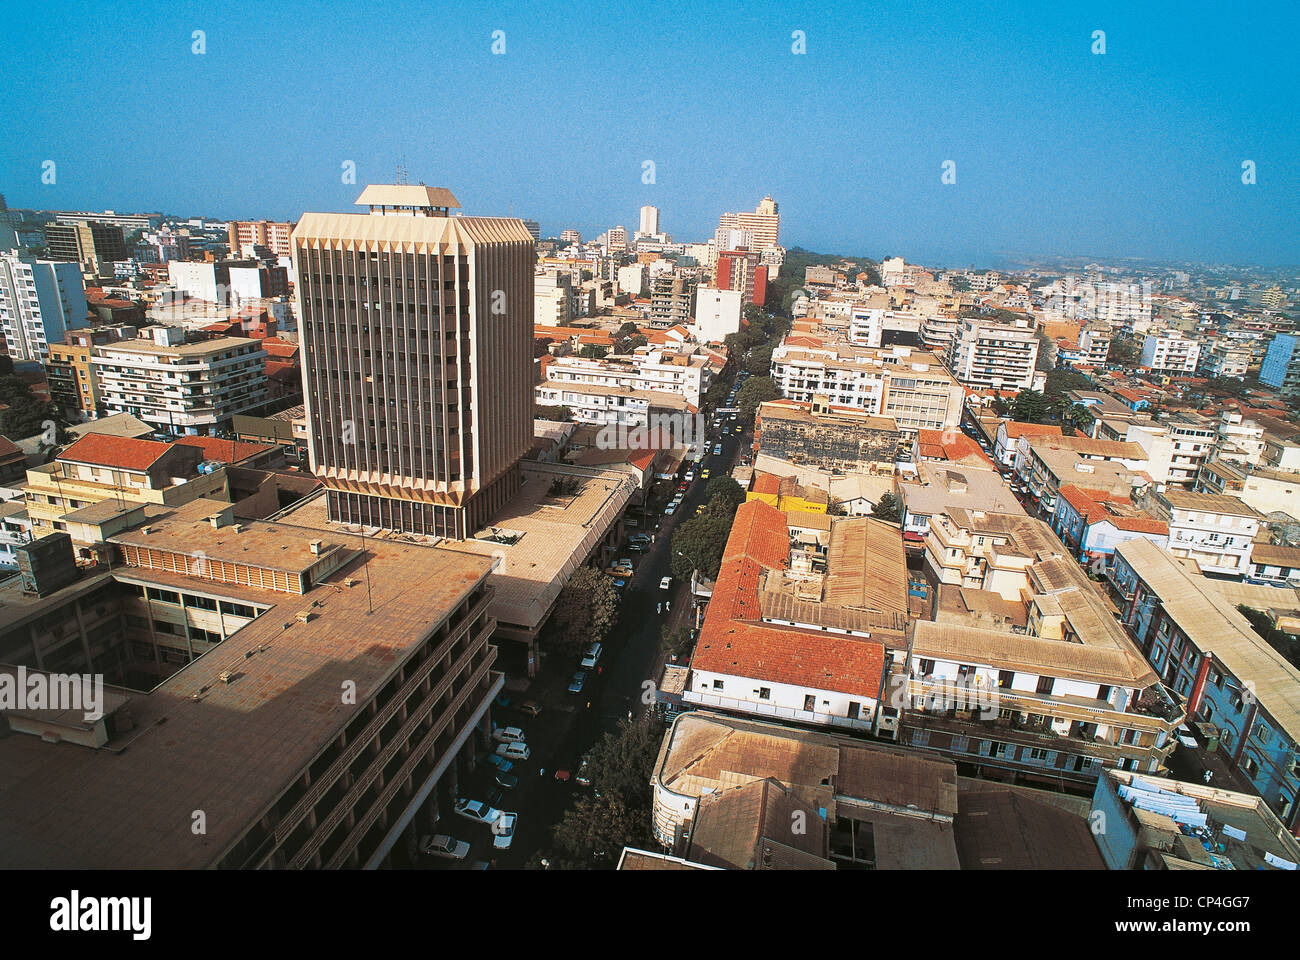 https://c8.alamy.com/comp/CP4GG7/senegal-dakar-view-of-the-city-from-the-terrace-of-the-hotel-de-lindependence-CP4GG7.jpg